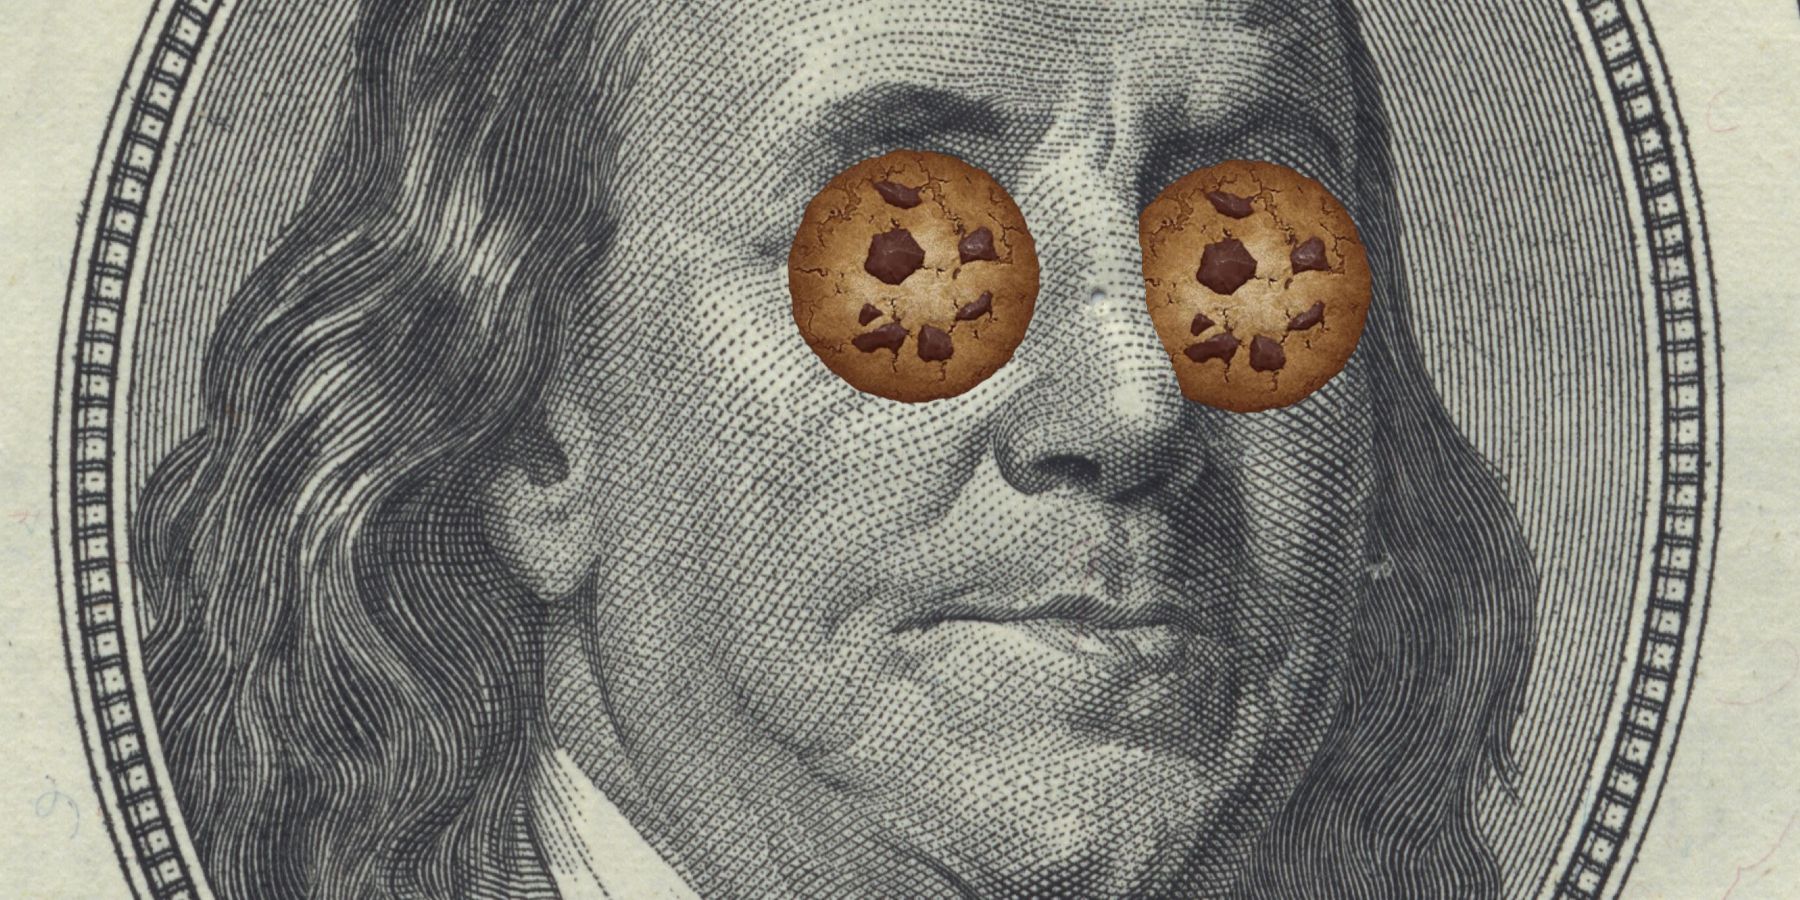 Benjamin Franklin dollar bill portrait with cookies over the eyes